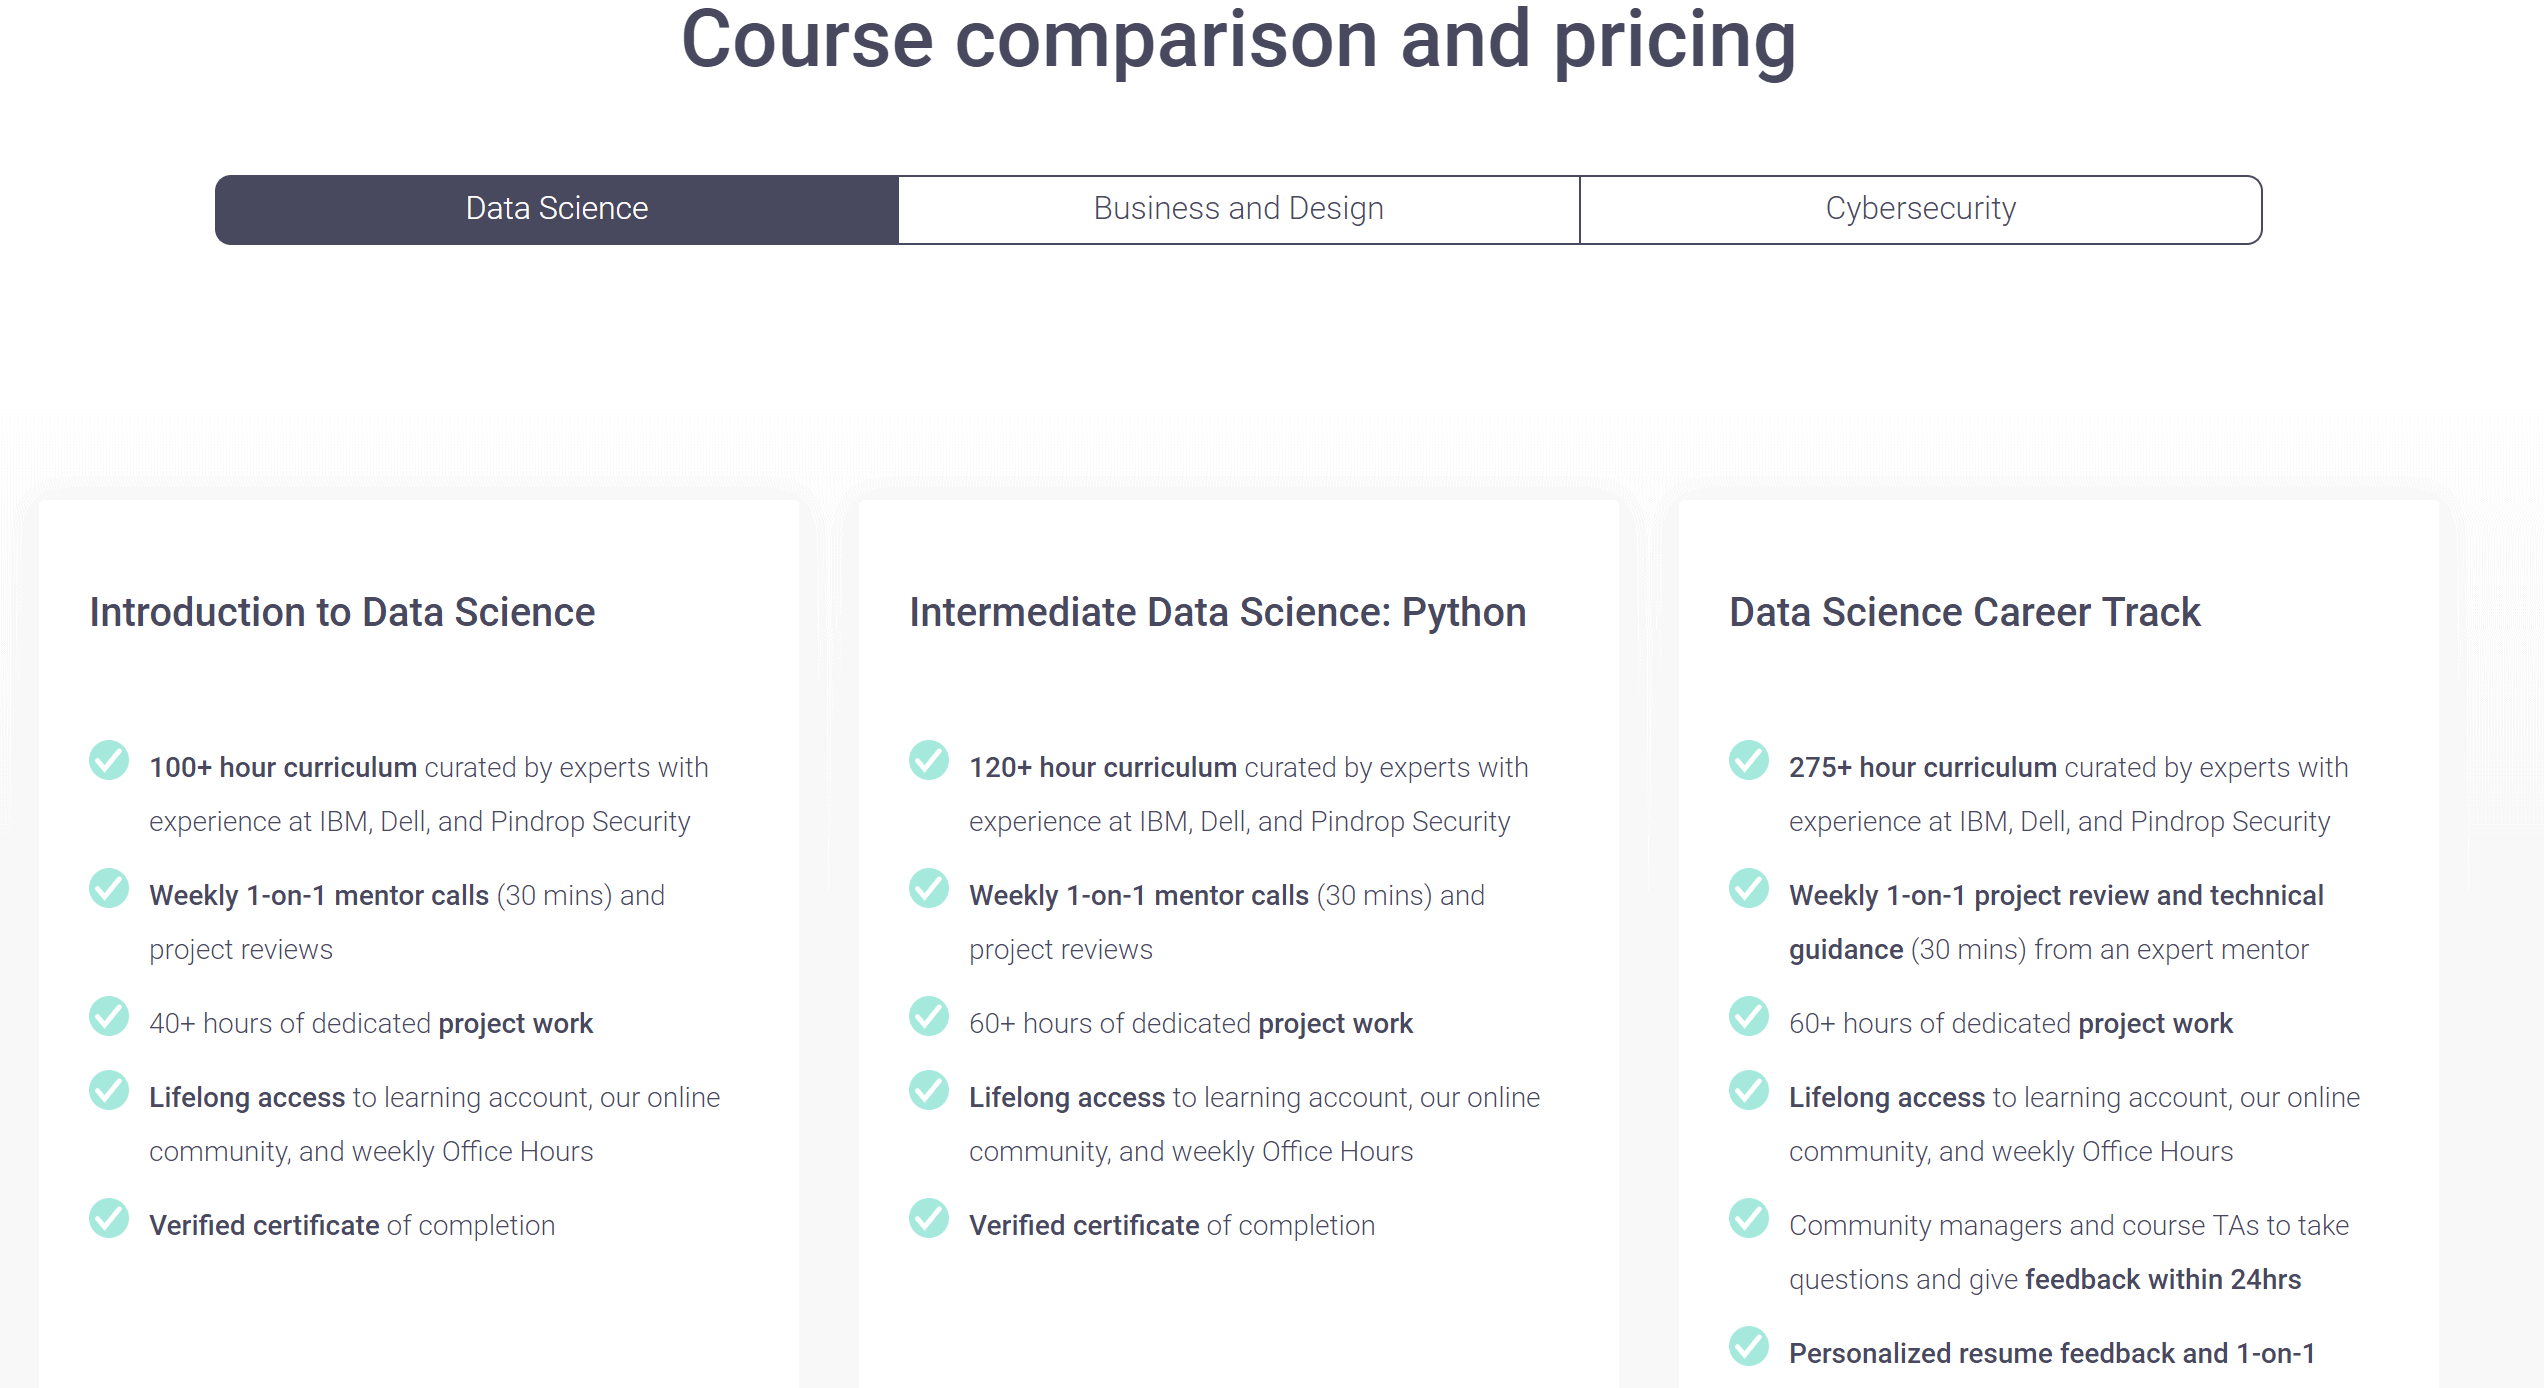 Springboard Pricing For Data Science Courses